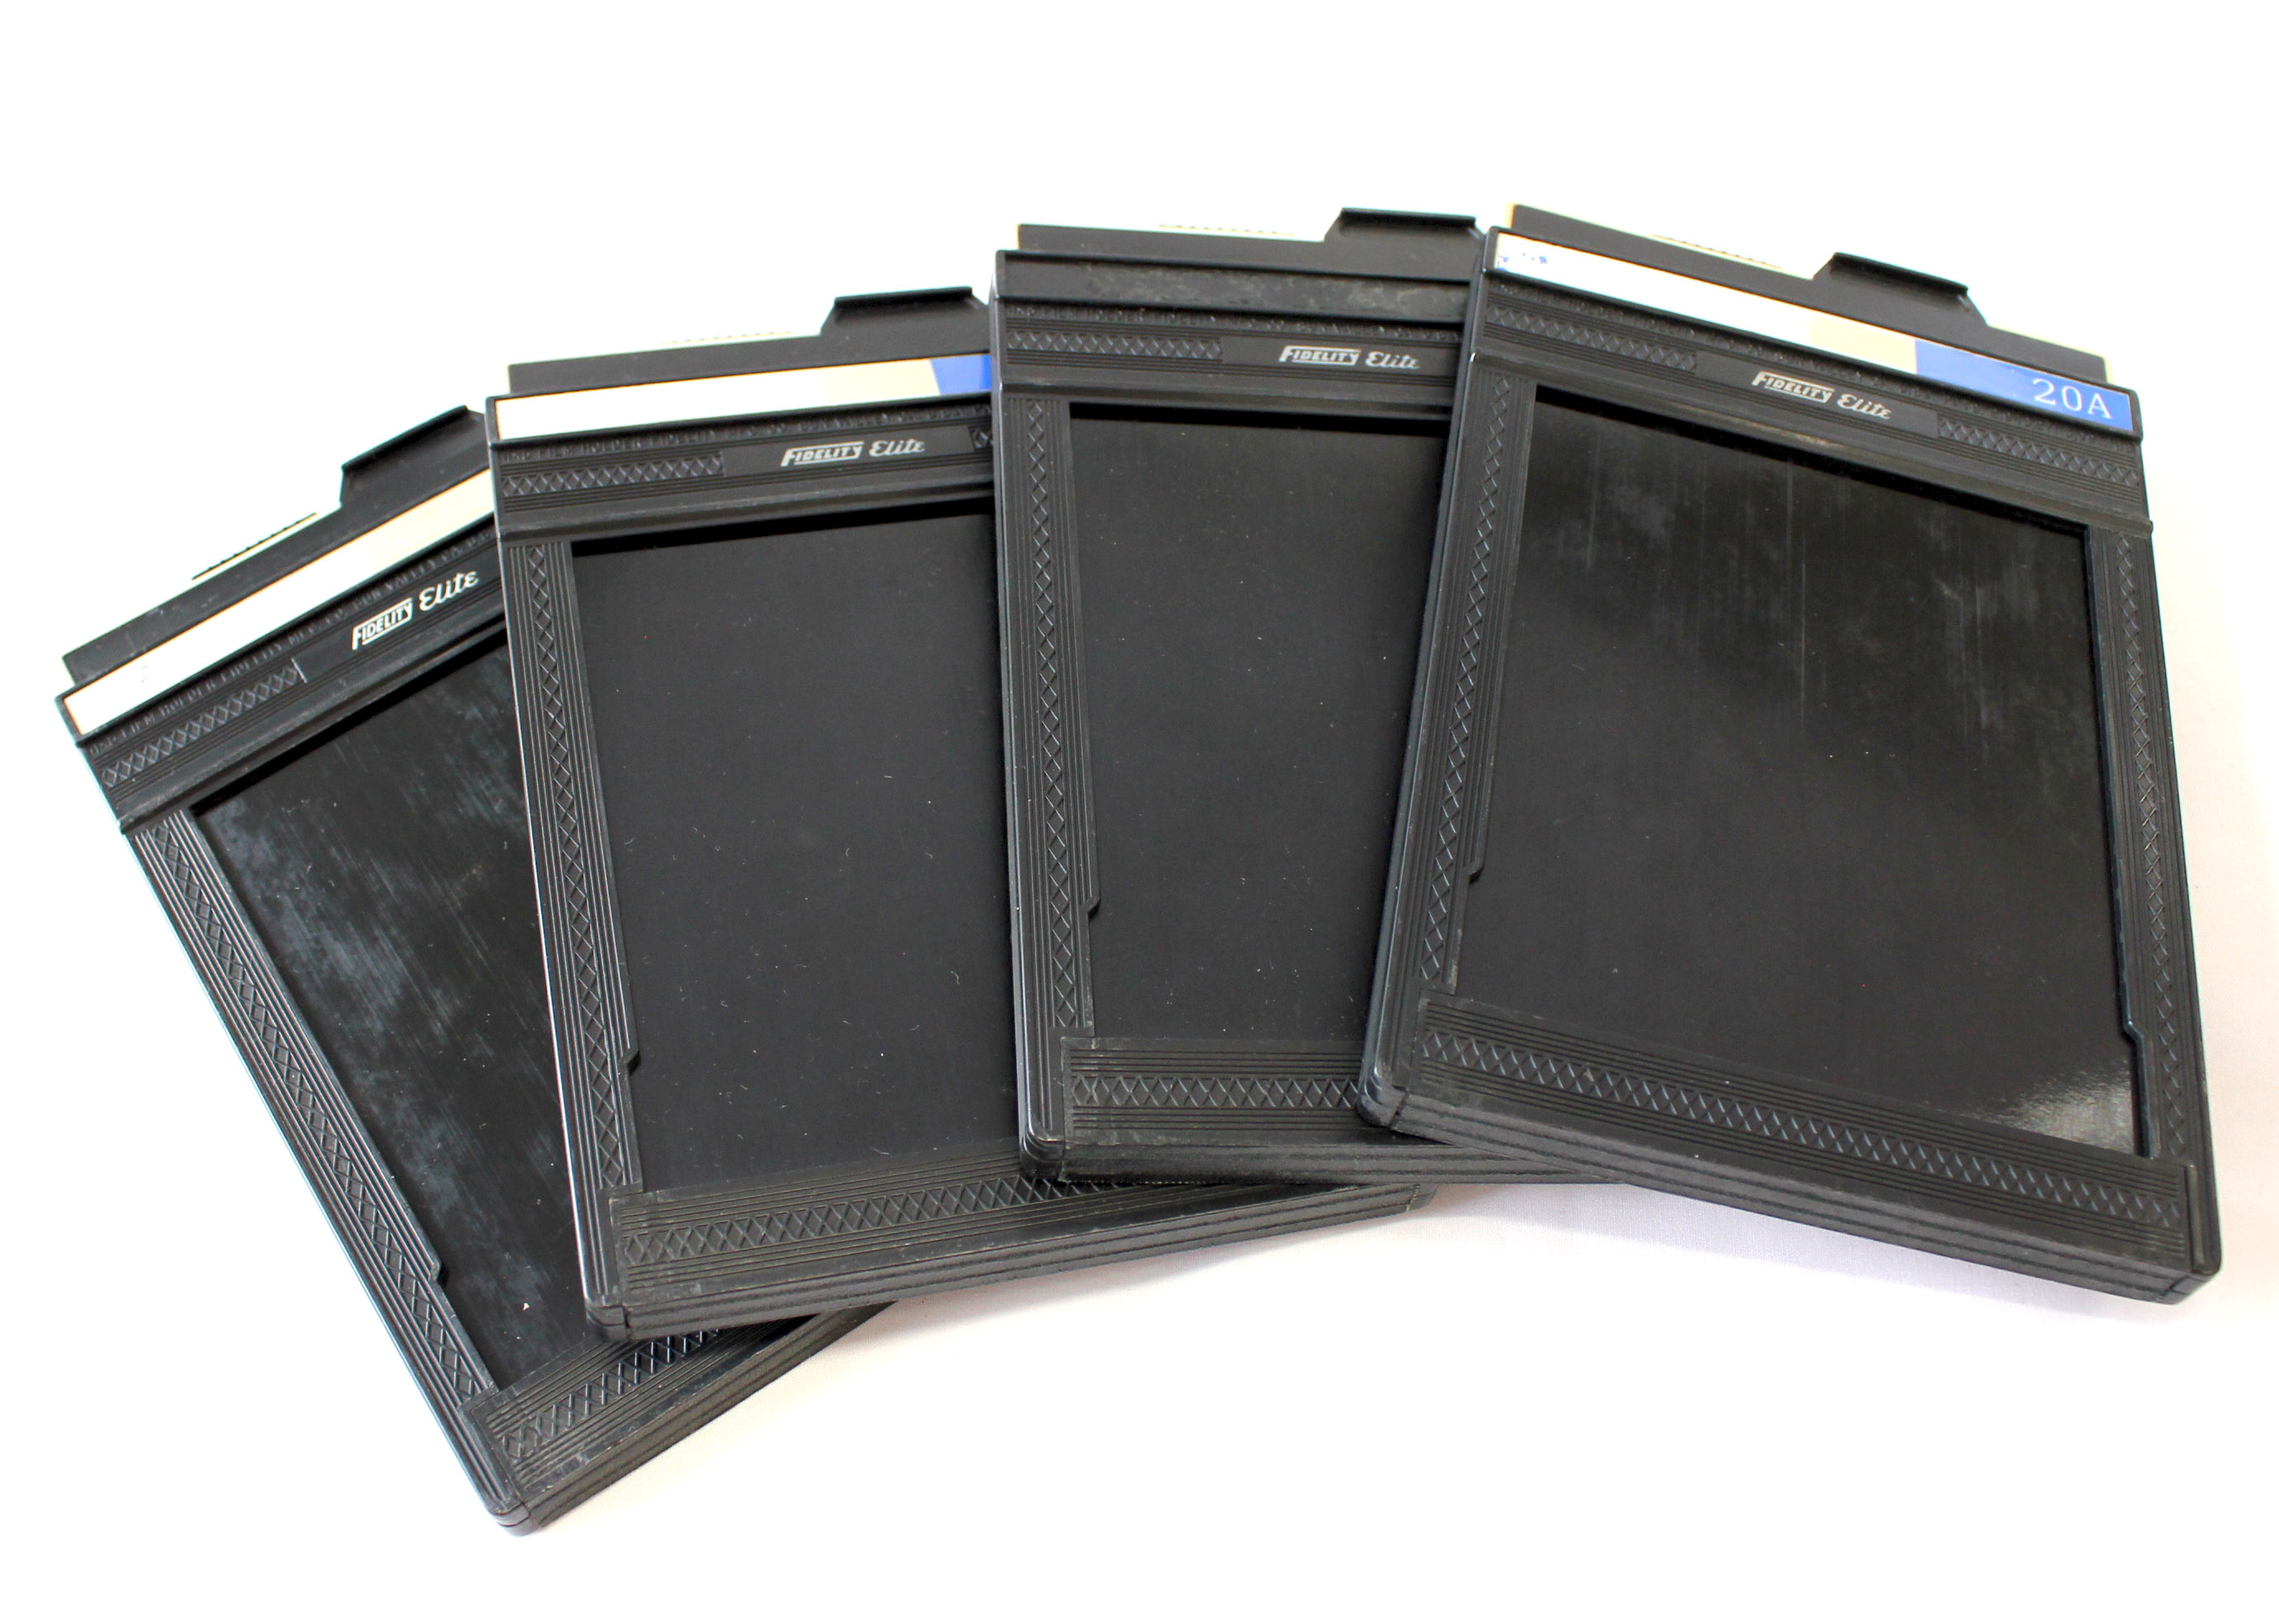 Japan Used Camera Shop | Fidelity 4x5 Cut Film Holder Lot of 4 from Japan